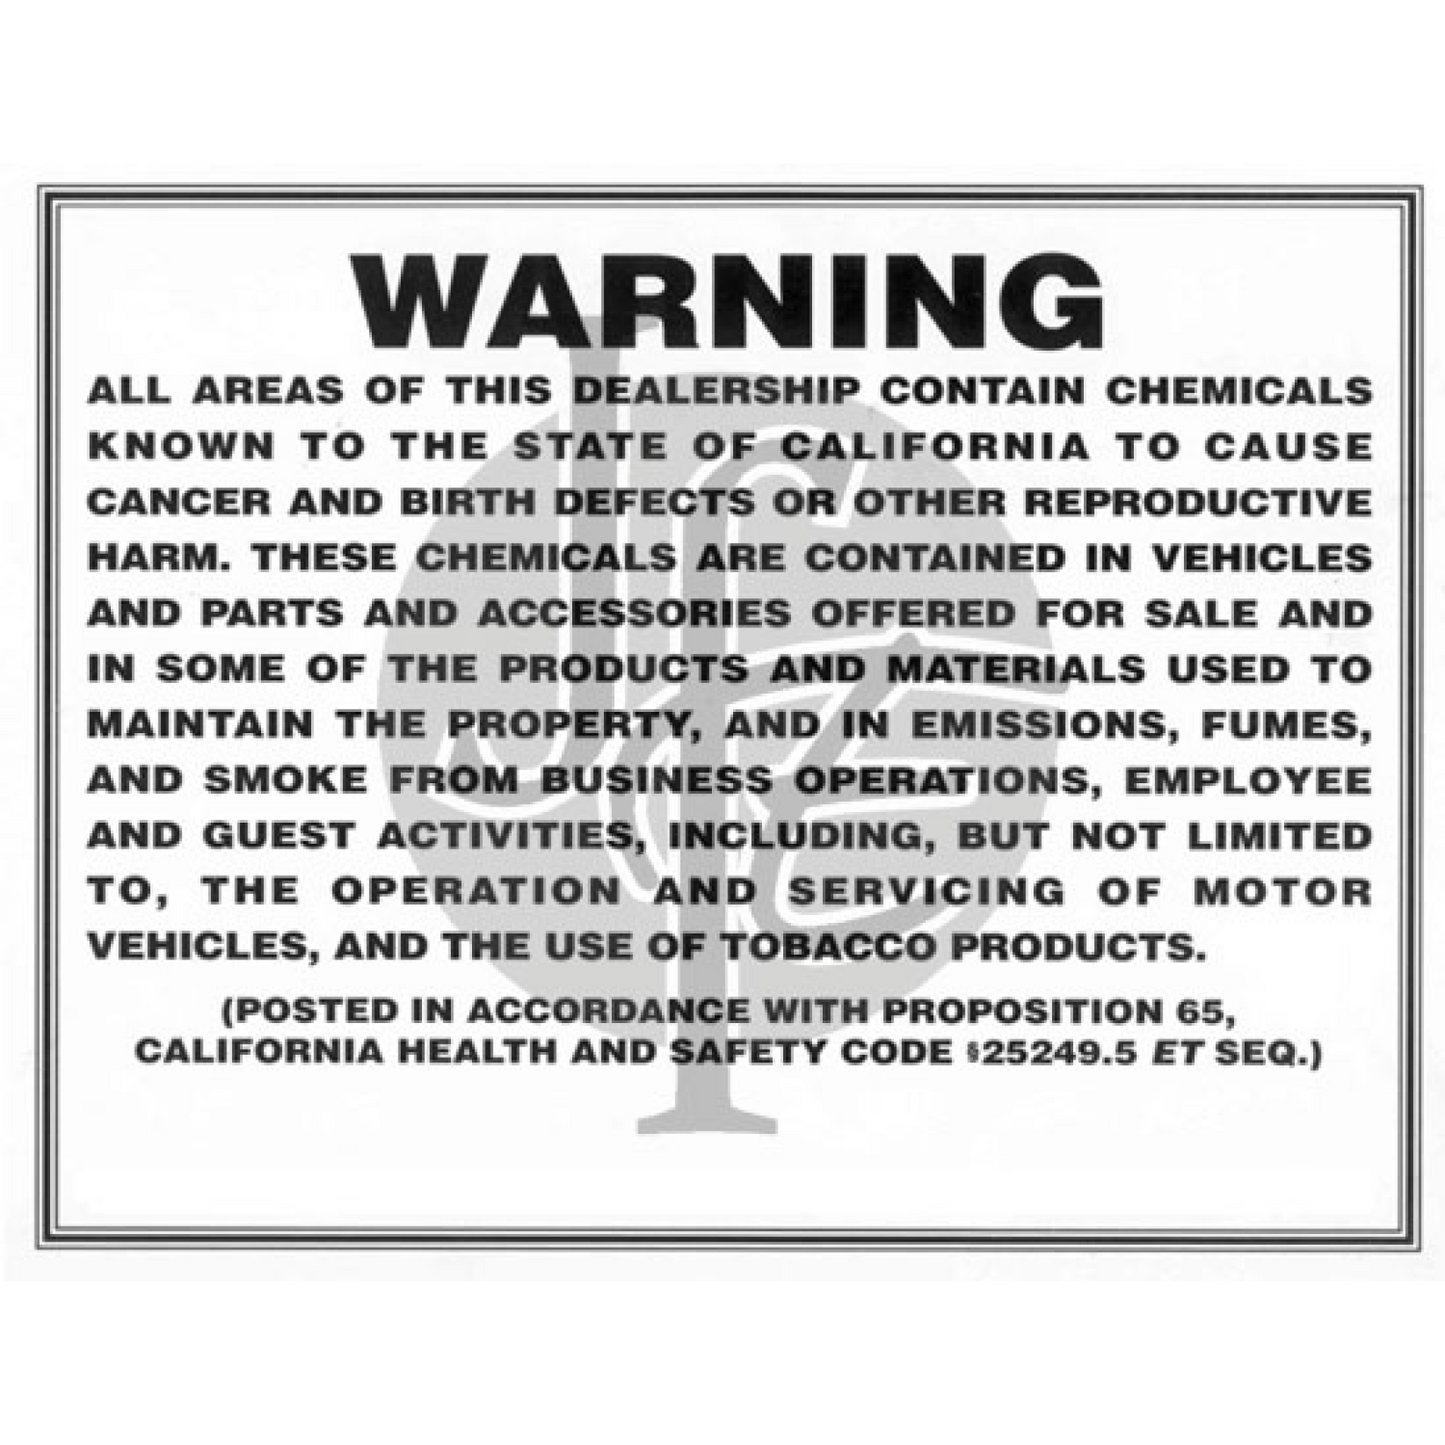 Prop 65 Cancer Disclosure Warning - English Only